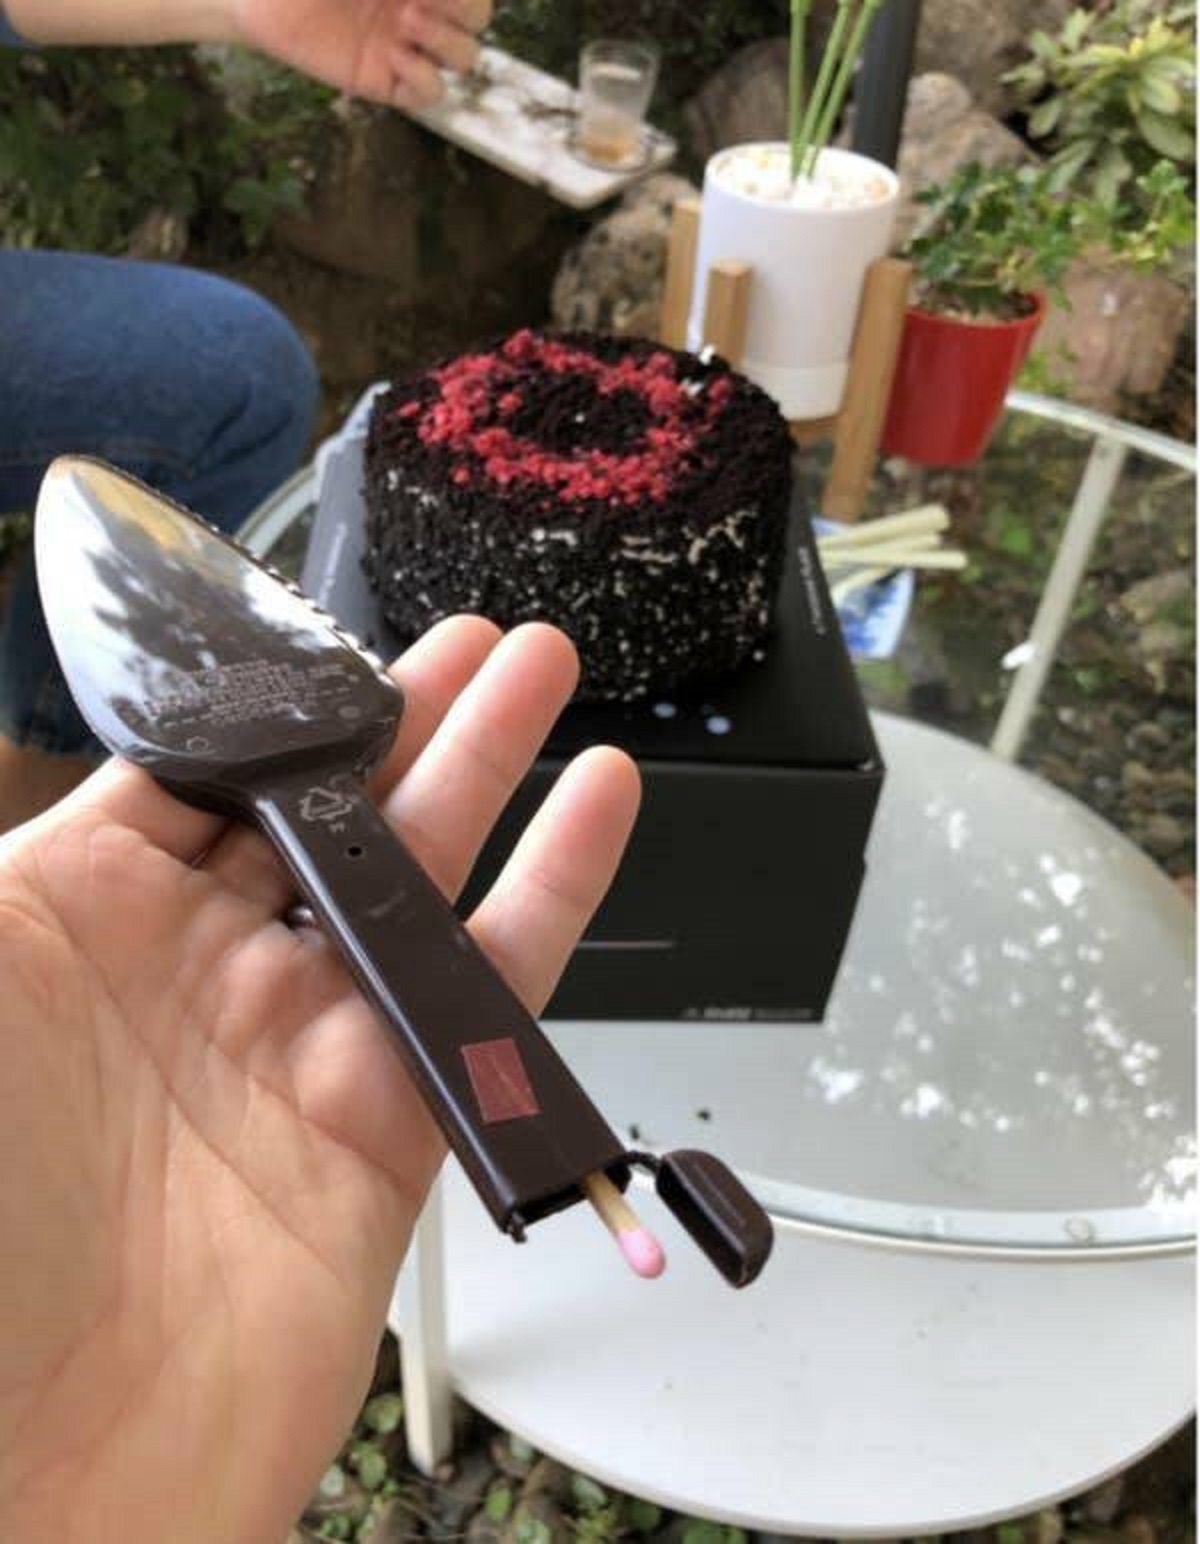 South Korean cakes also usually come with candles and matches — all inside a free cake knife.